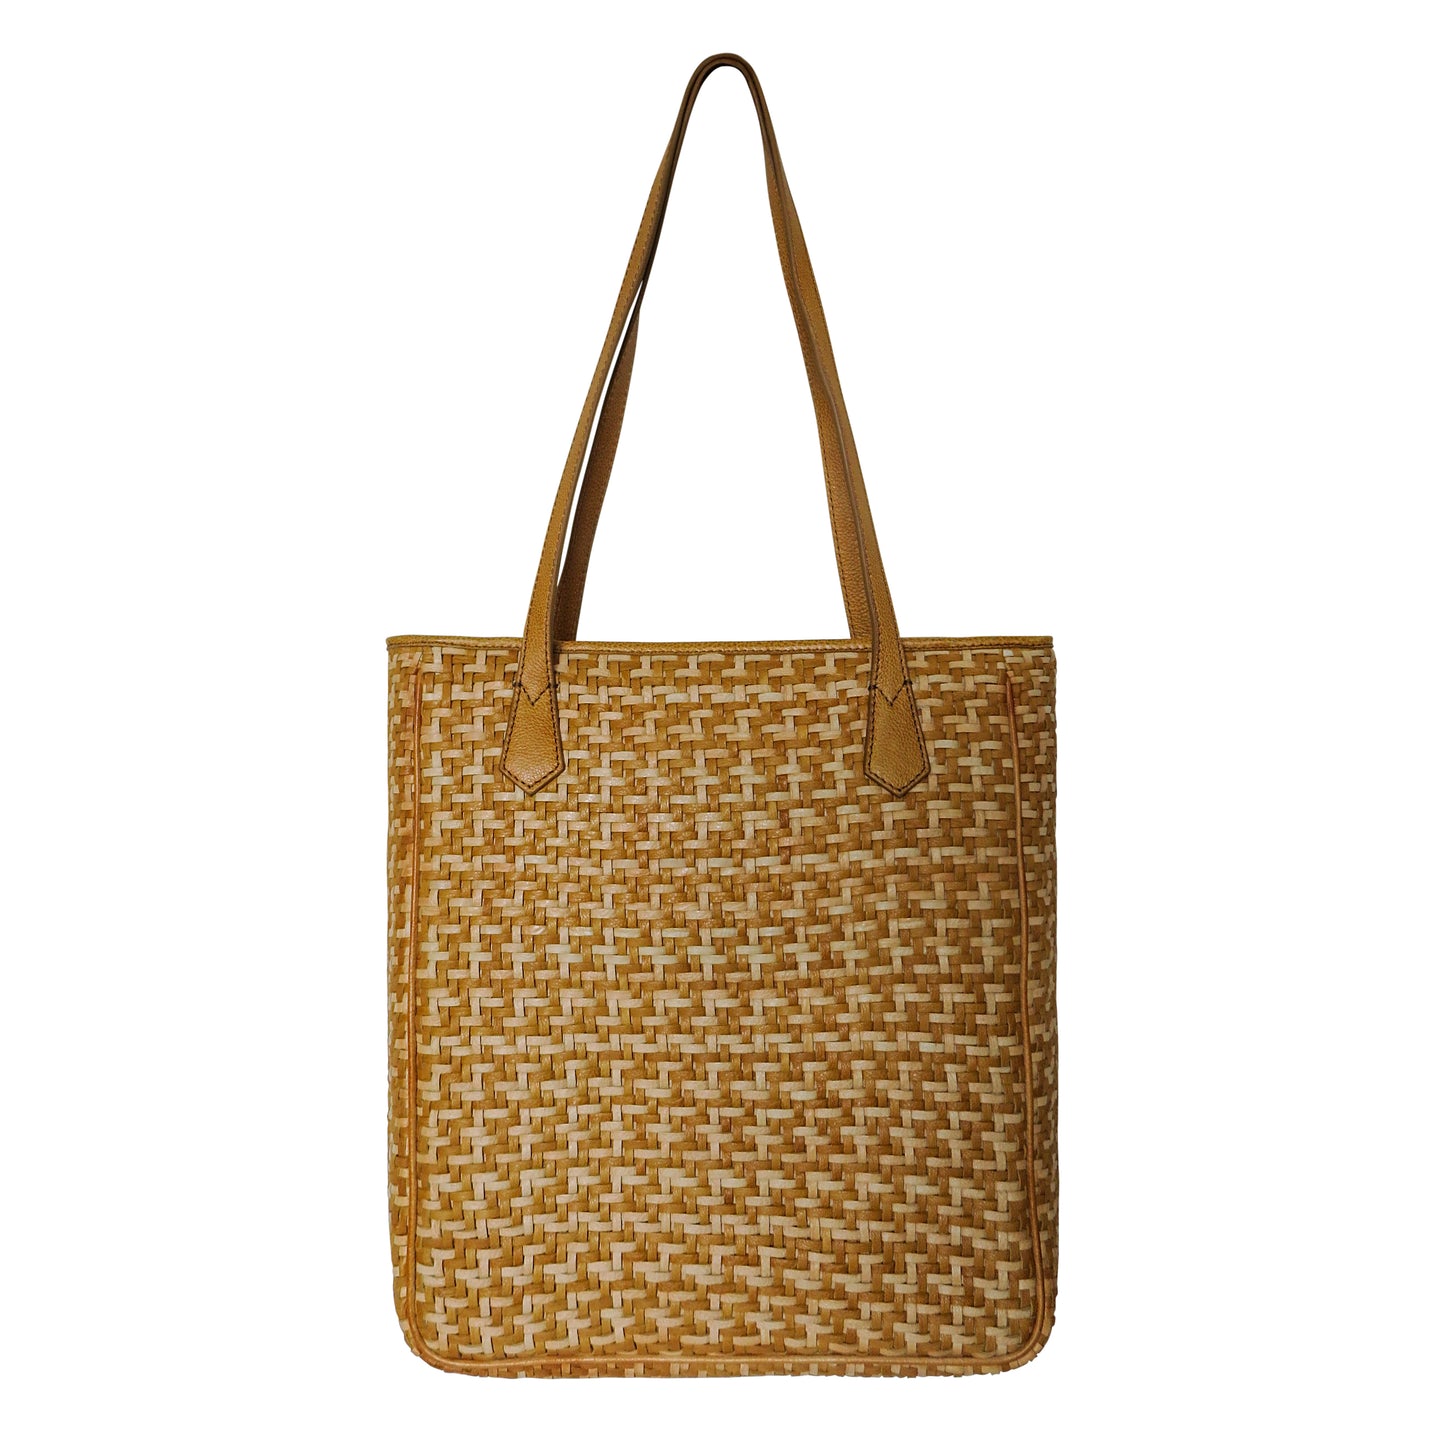 Lea Woven Leather Tote in Yellow/Beige